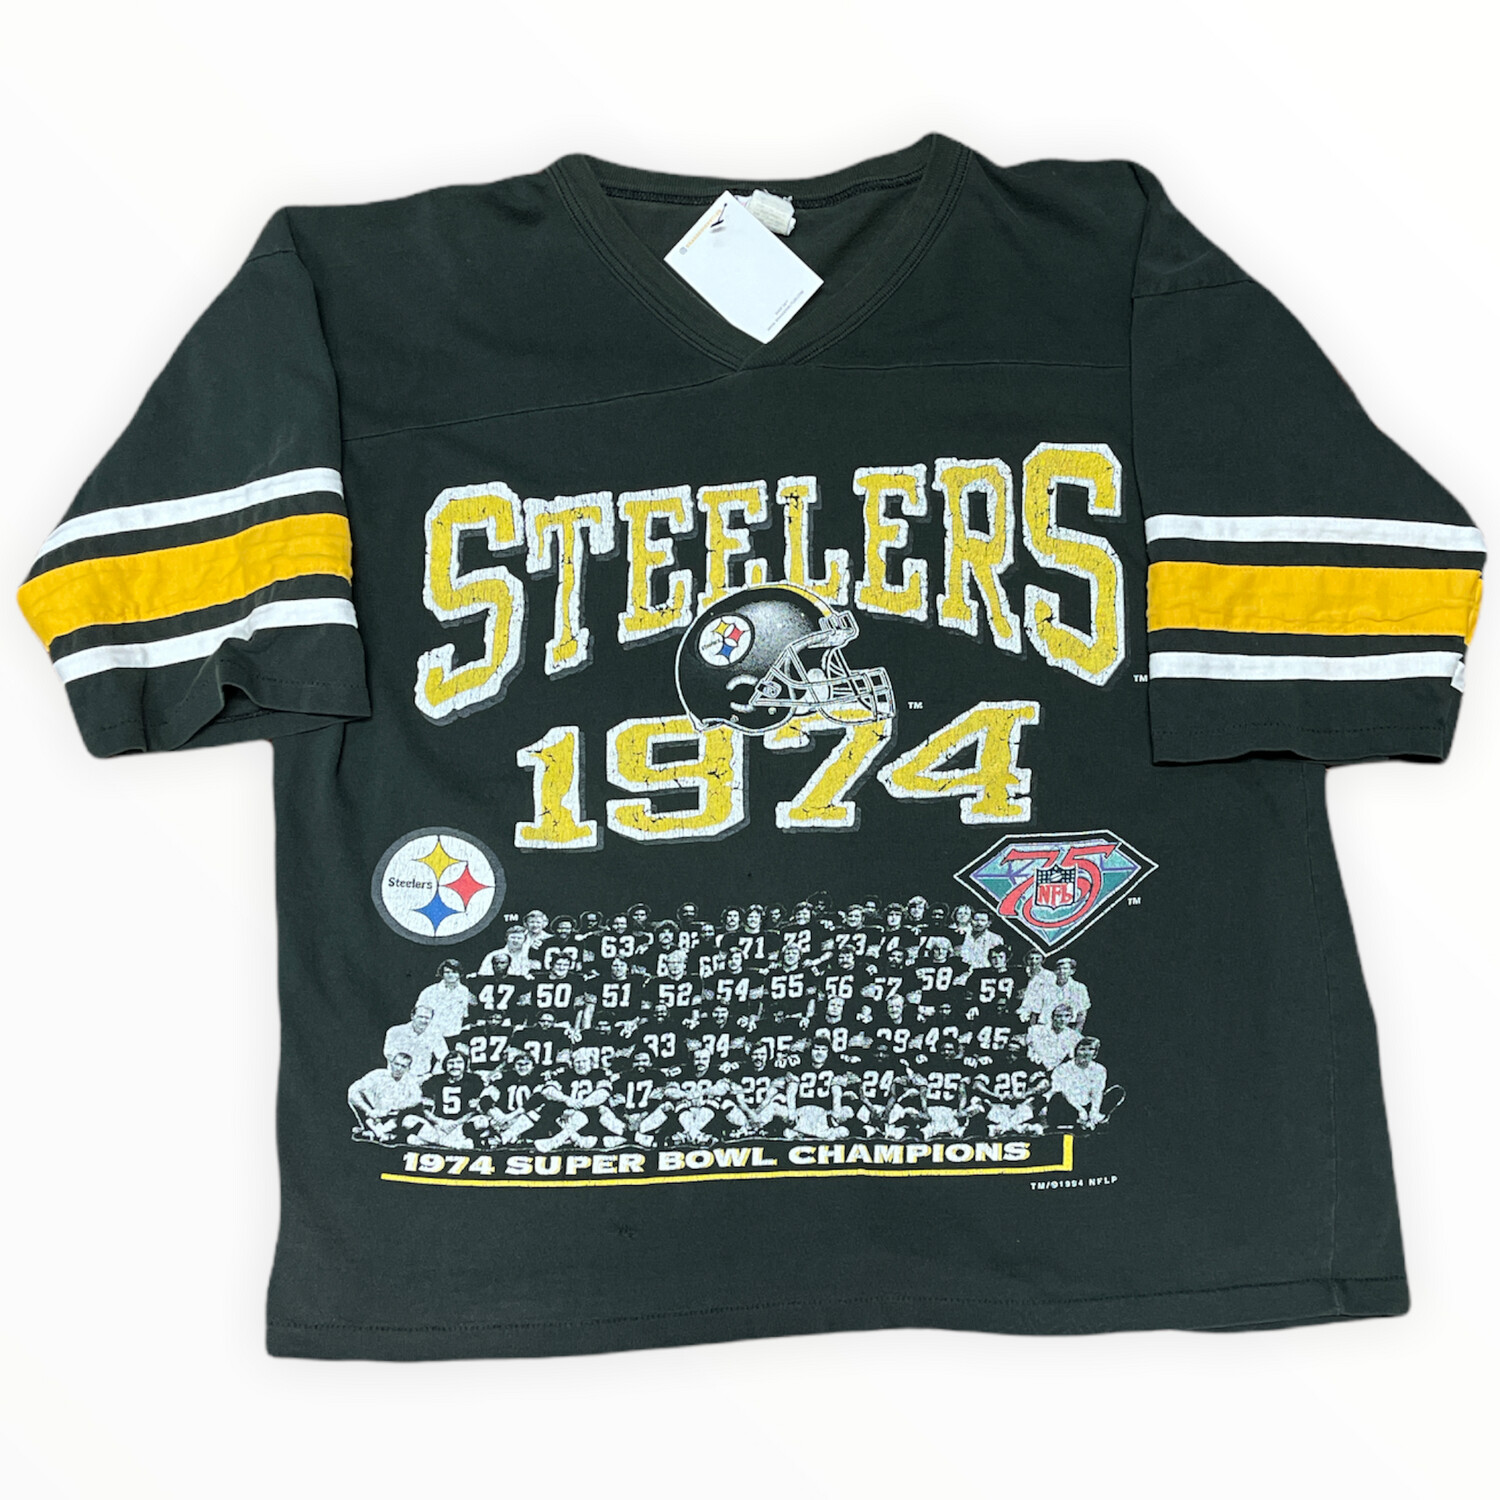 Vintage 1994 Steelers Tee, Size: Large, Color: Black, Style: Pittsburgh